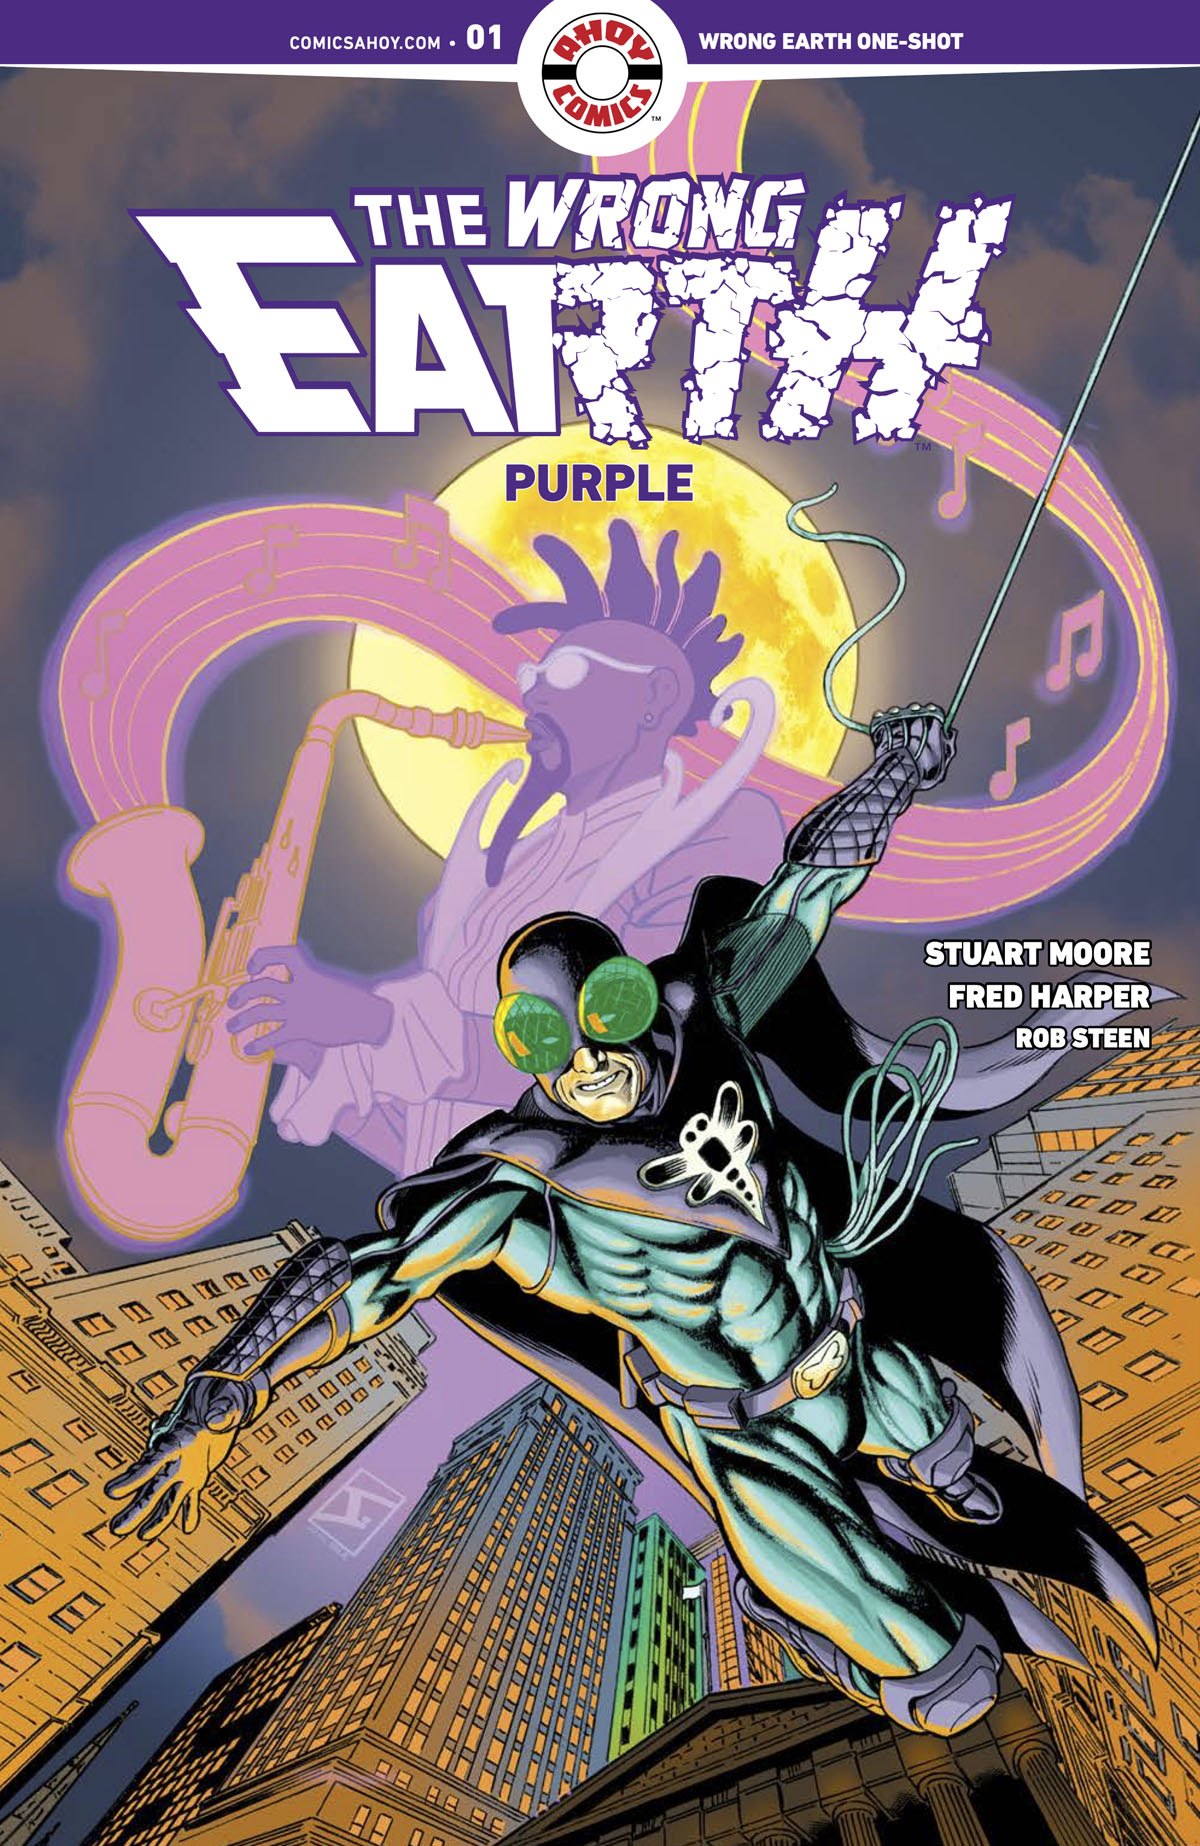 The Wrong Earth: Purple cover by Jamal Igle